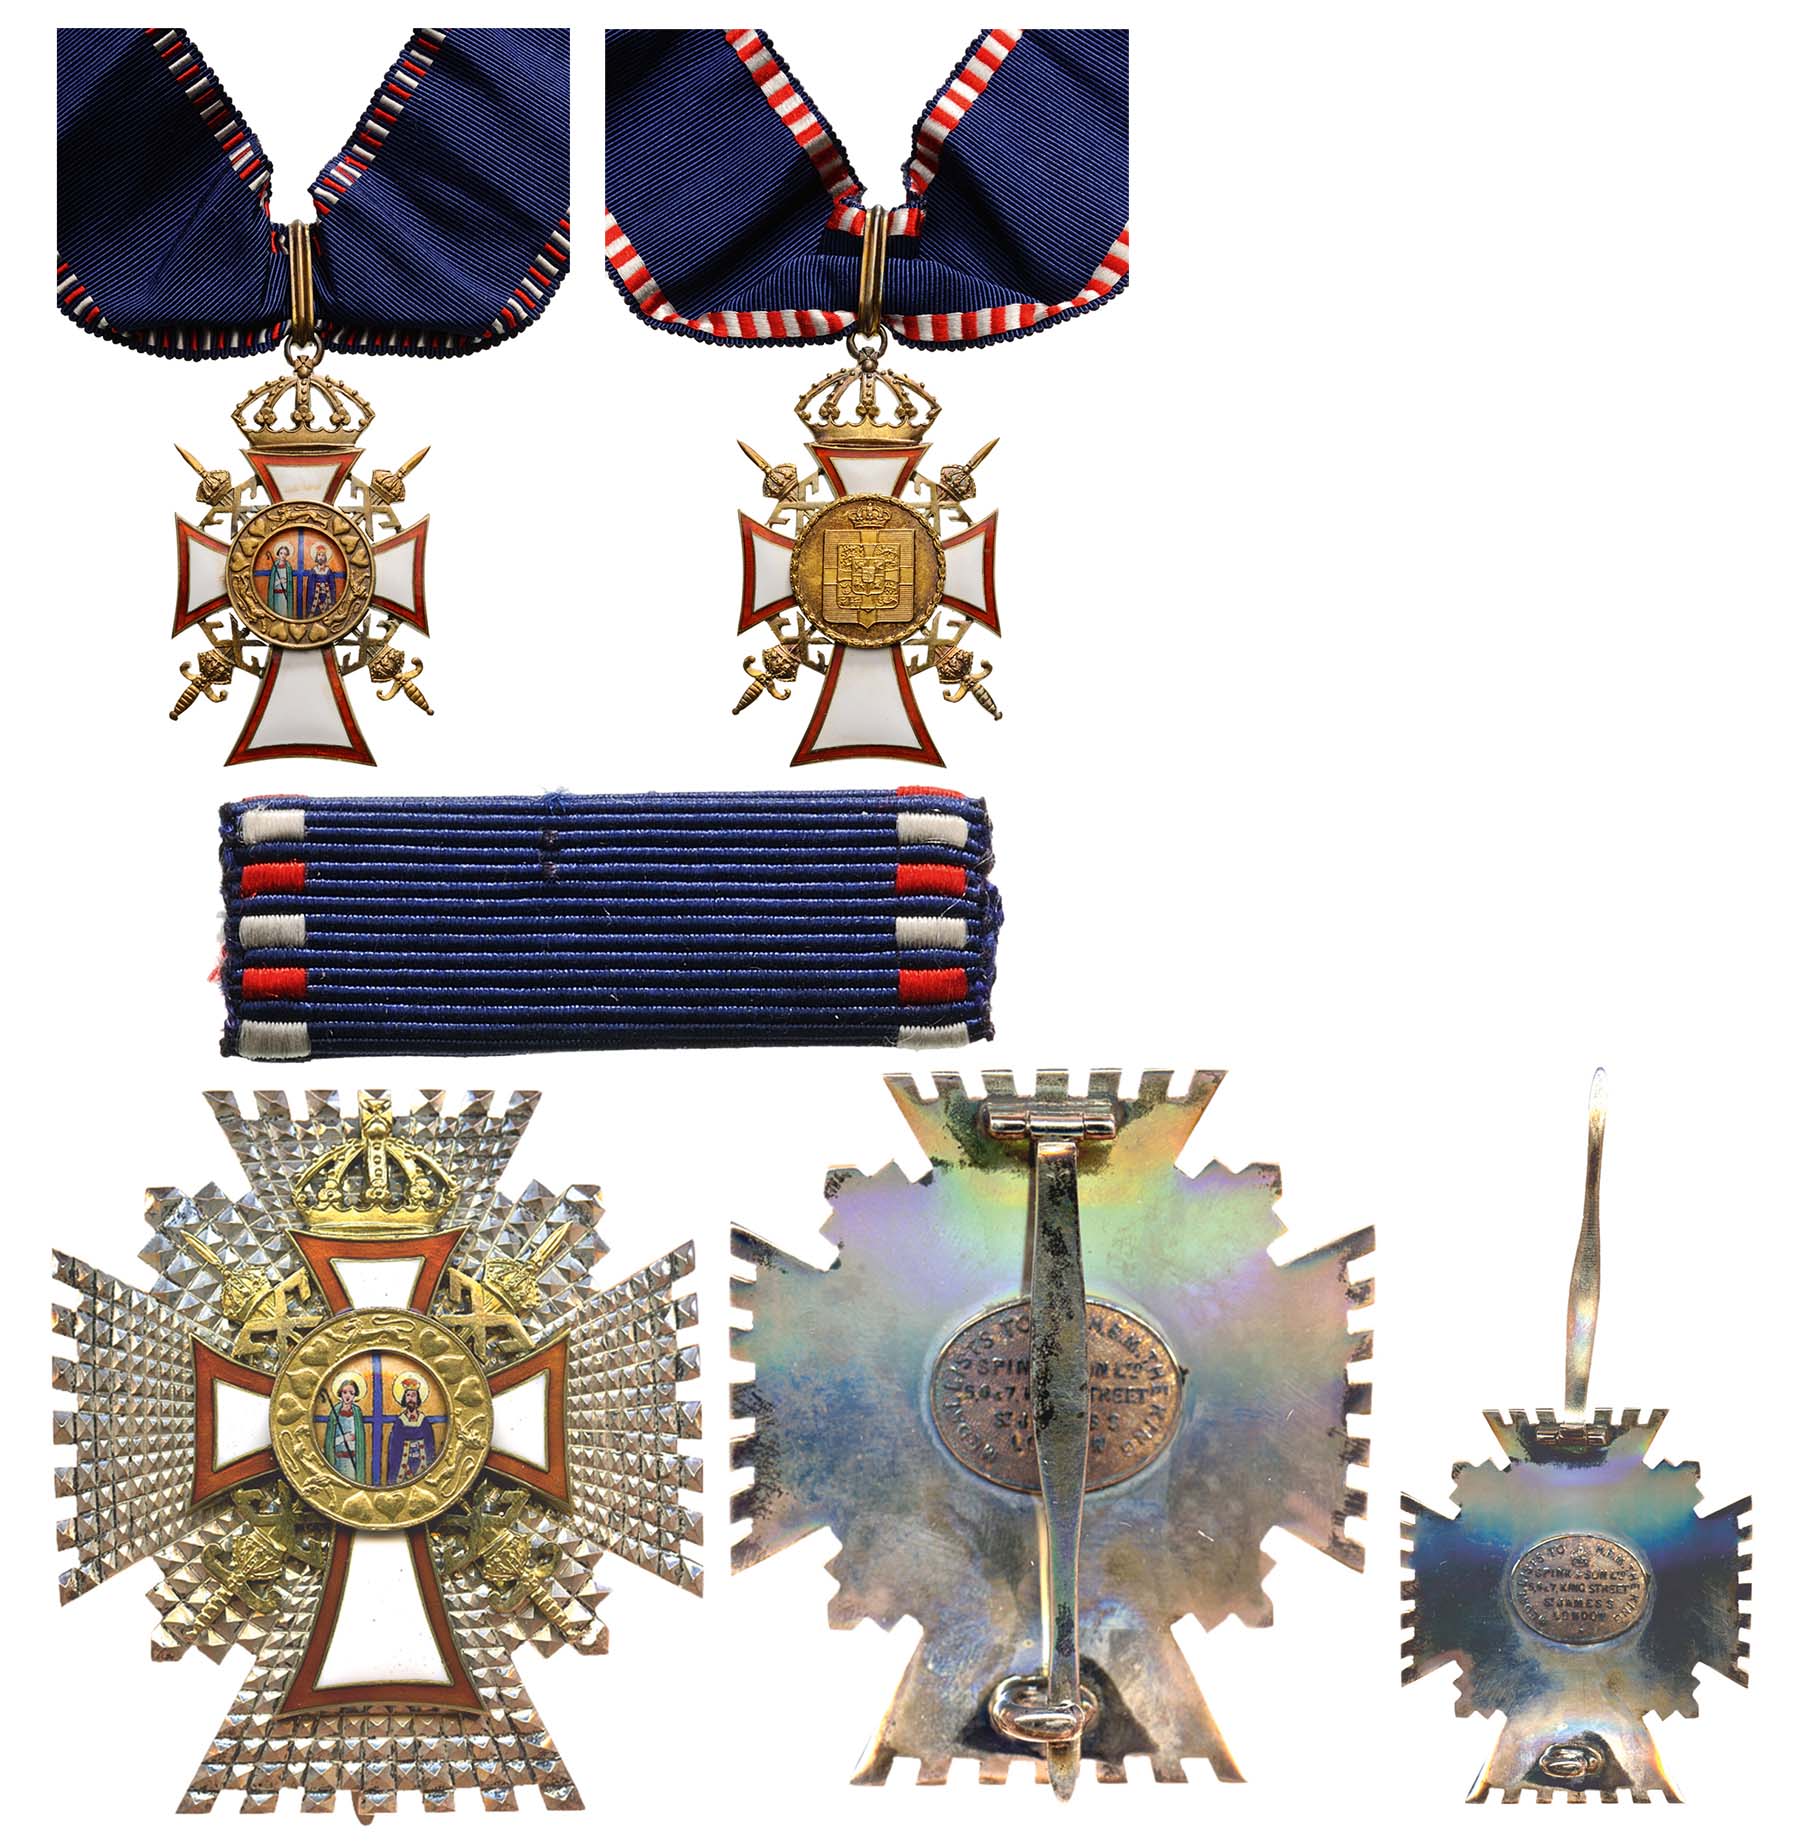 Royal Family and Dynastic Order of St. George and Constantine